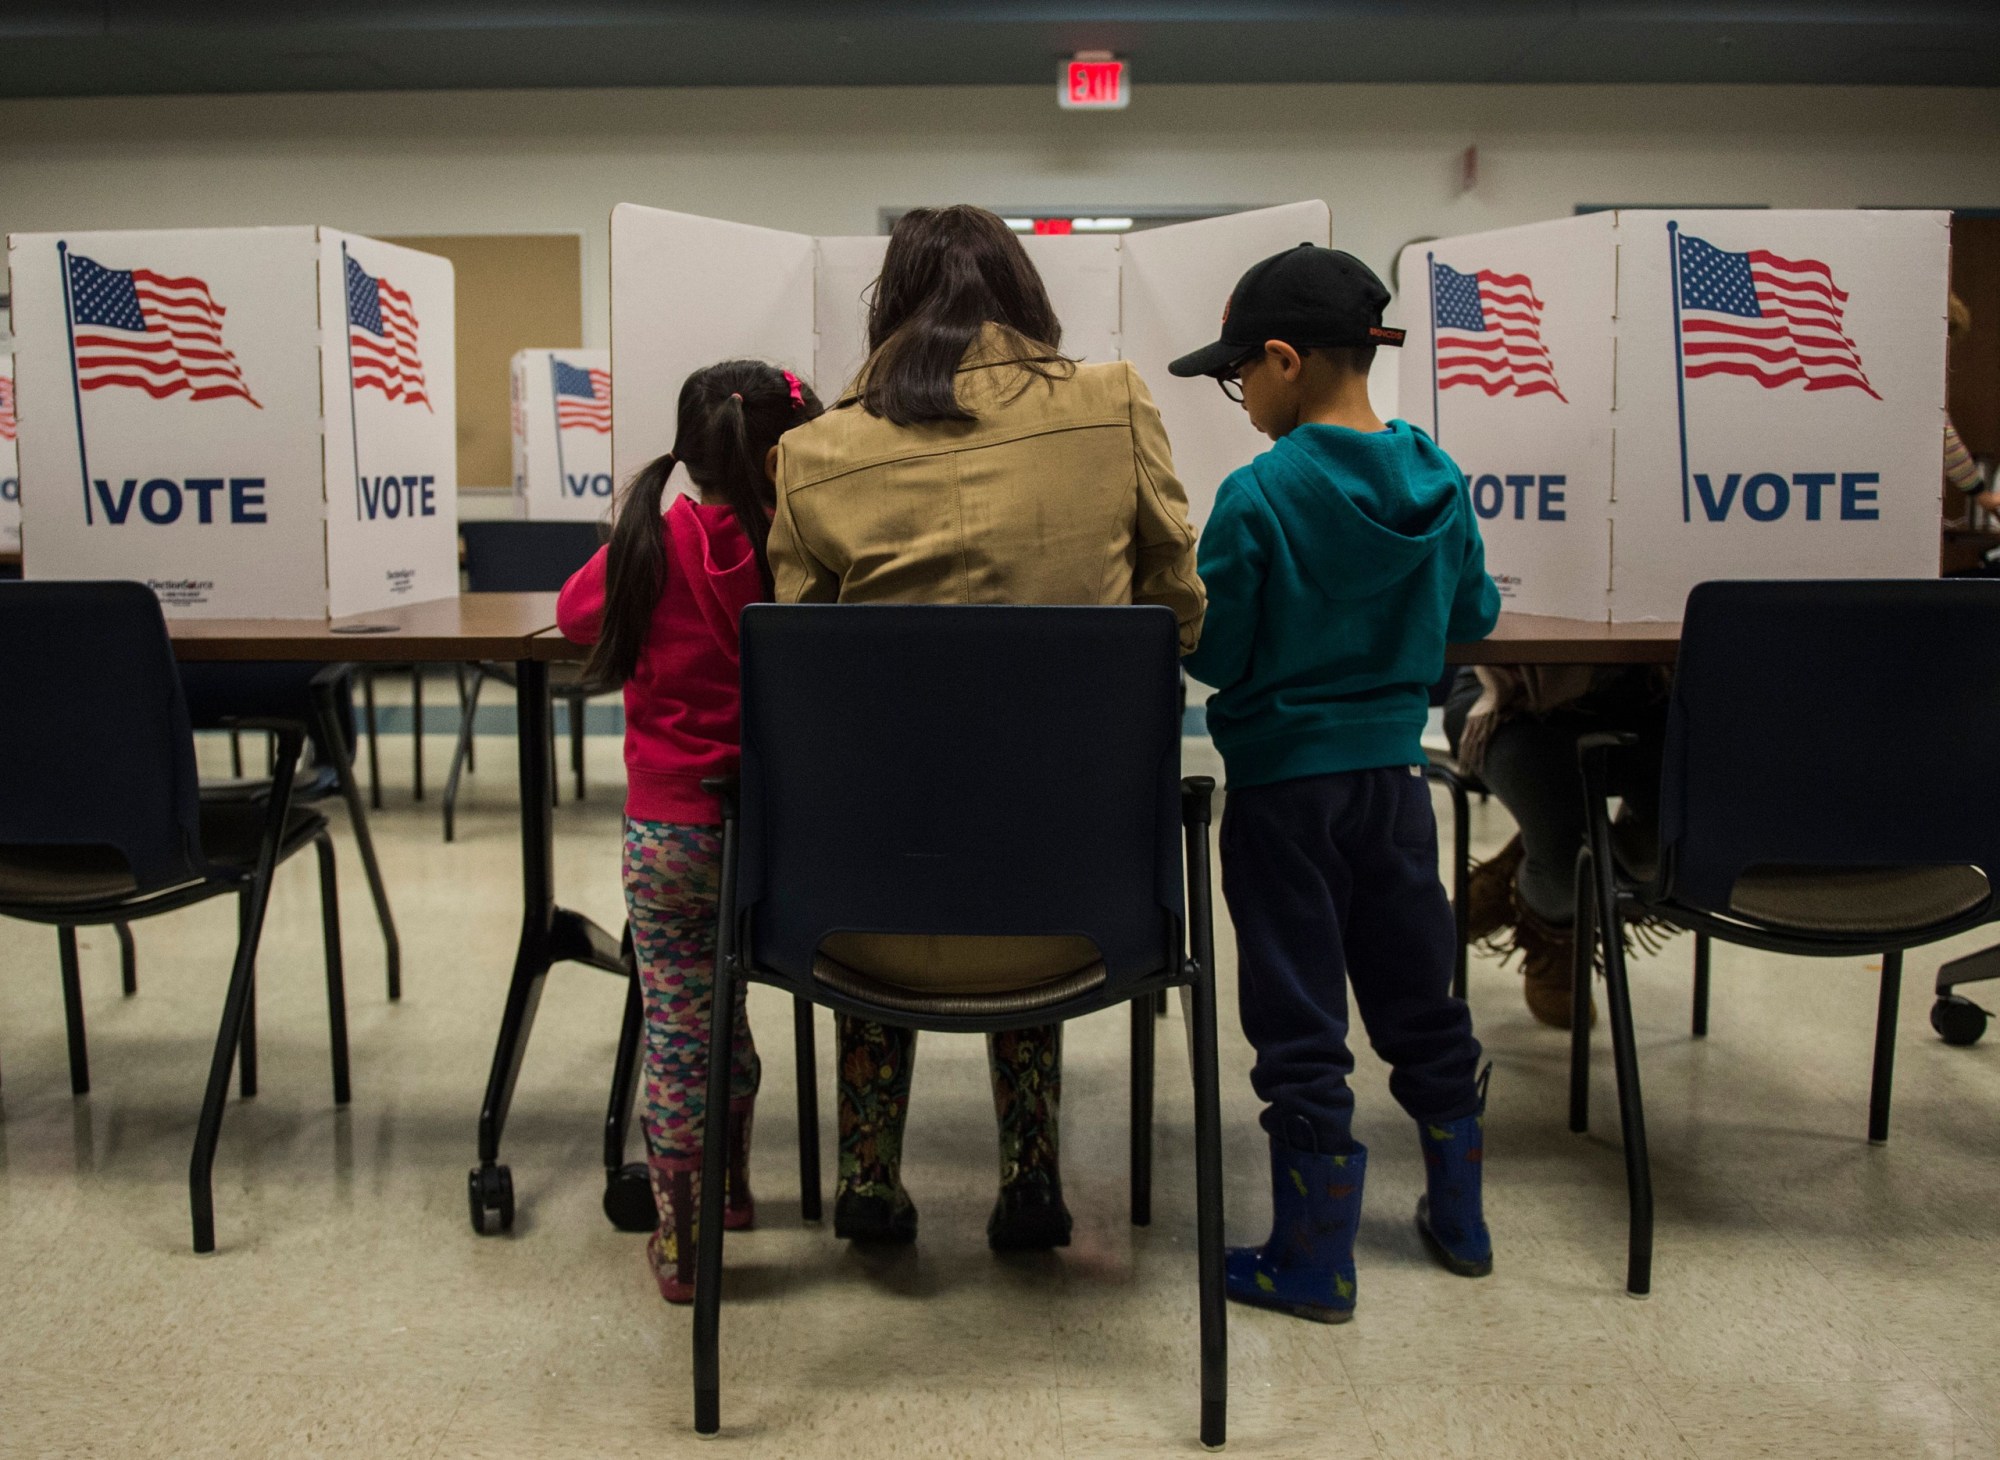 A woman and her children vote at a polling station during the midterm elections at the Fairfax County bus garage in Lorton, Virginia, on November 6, 2018. (Getty/Andrew Caballero)